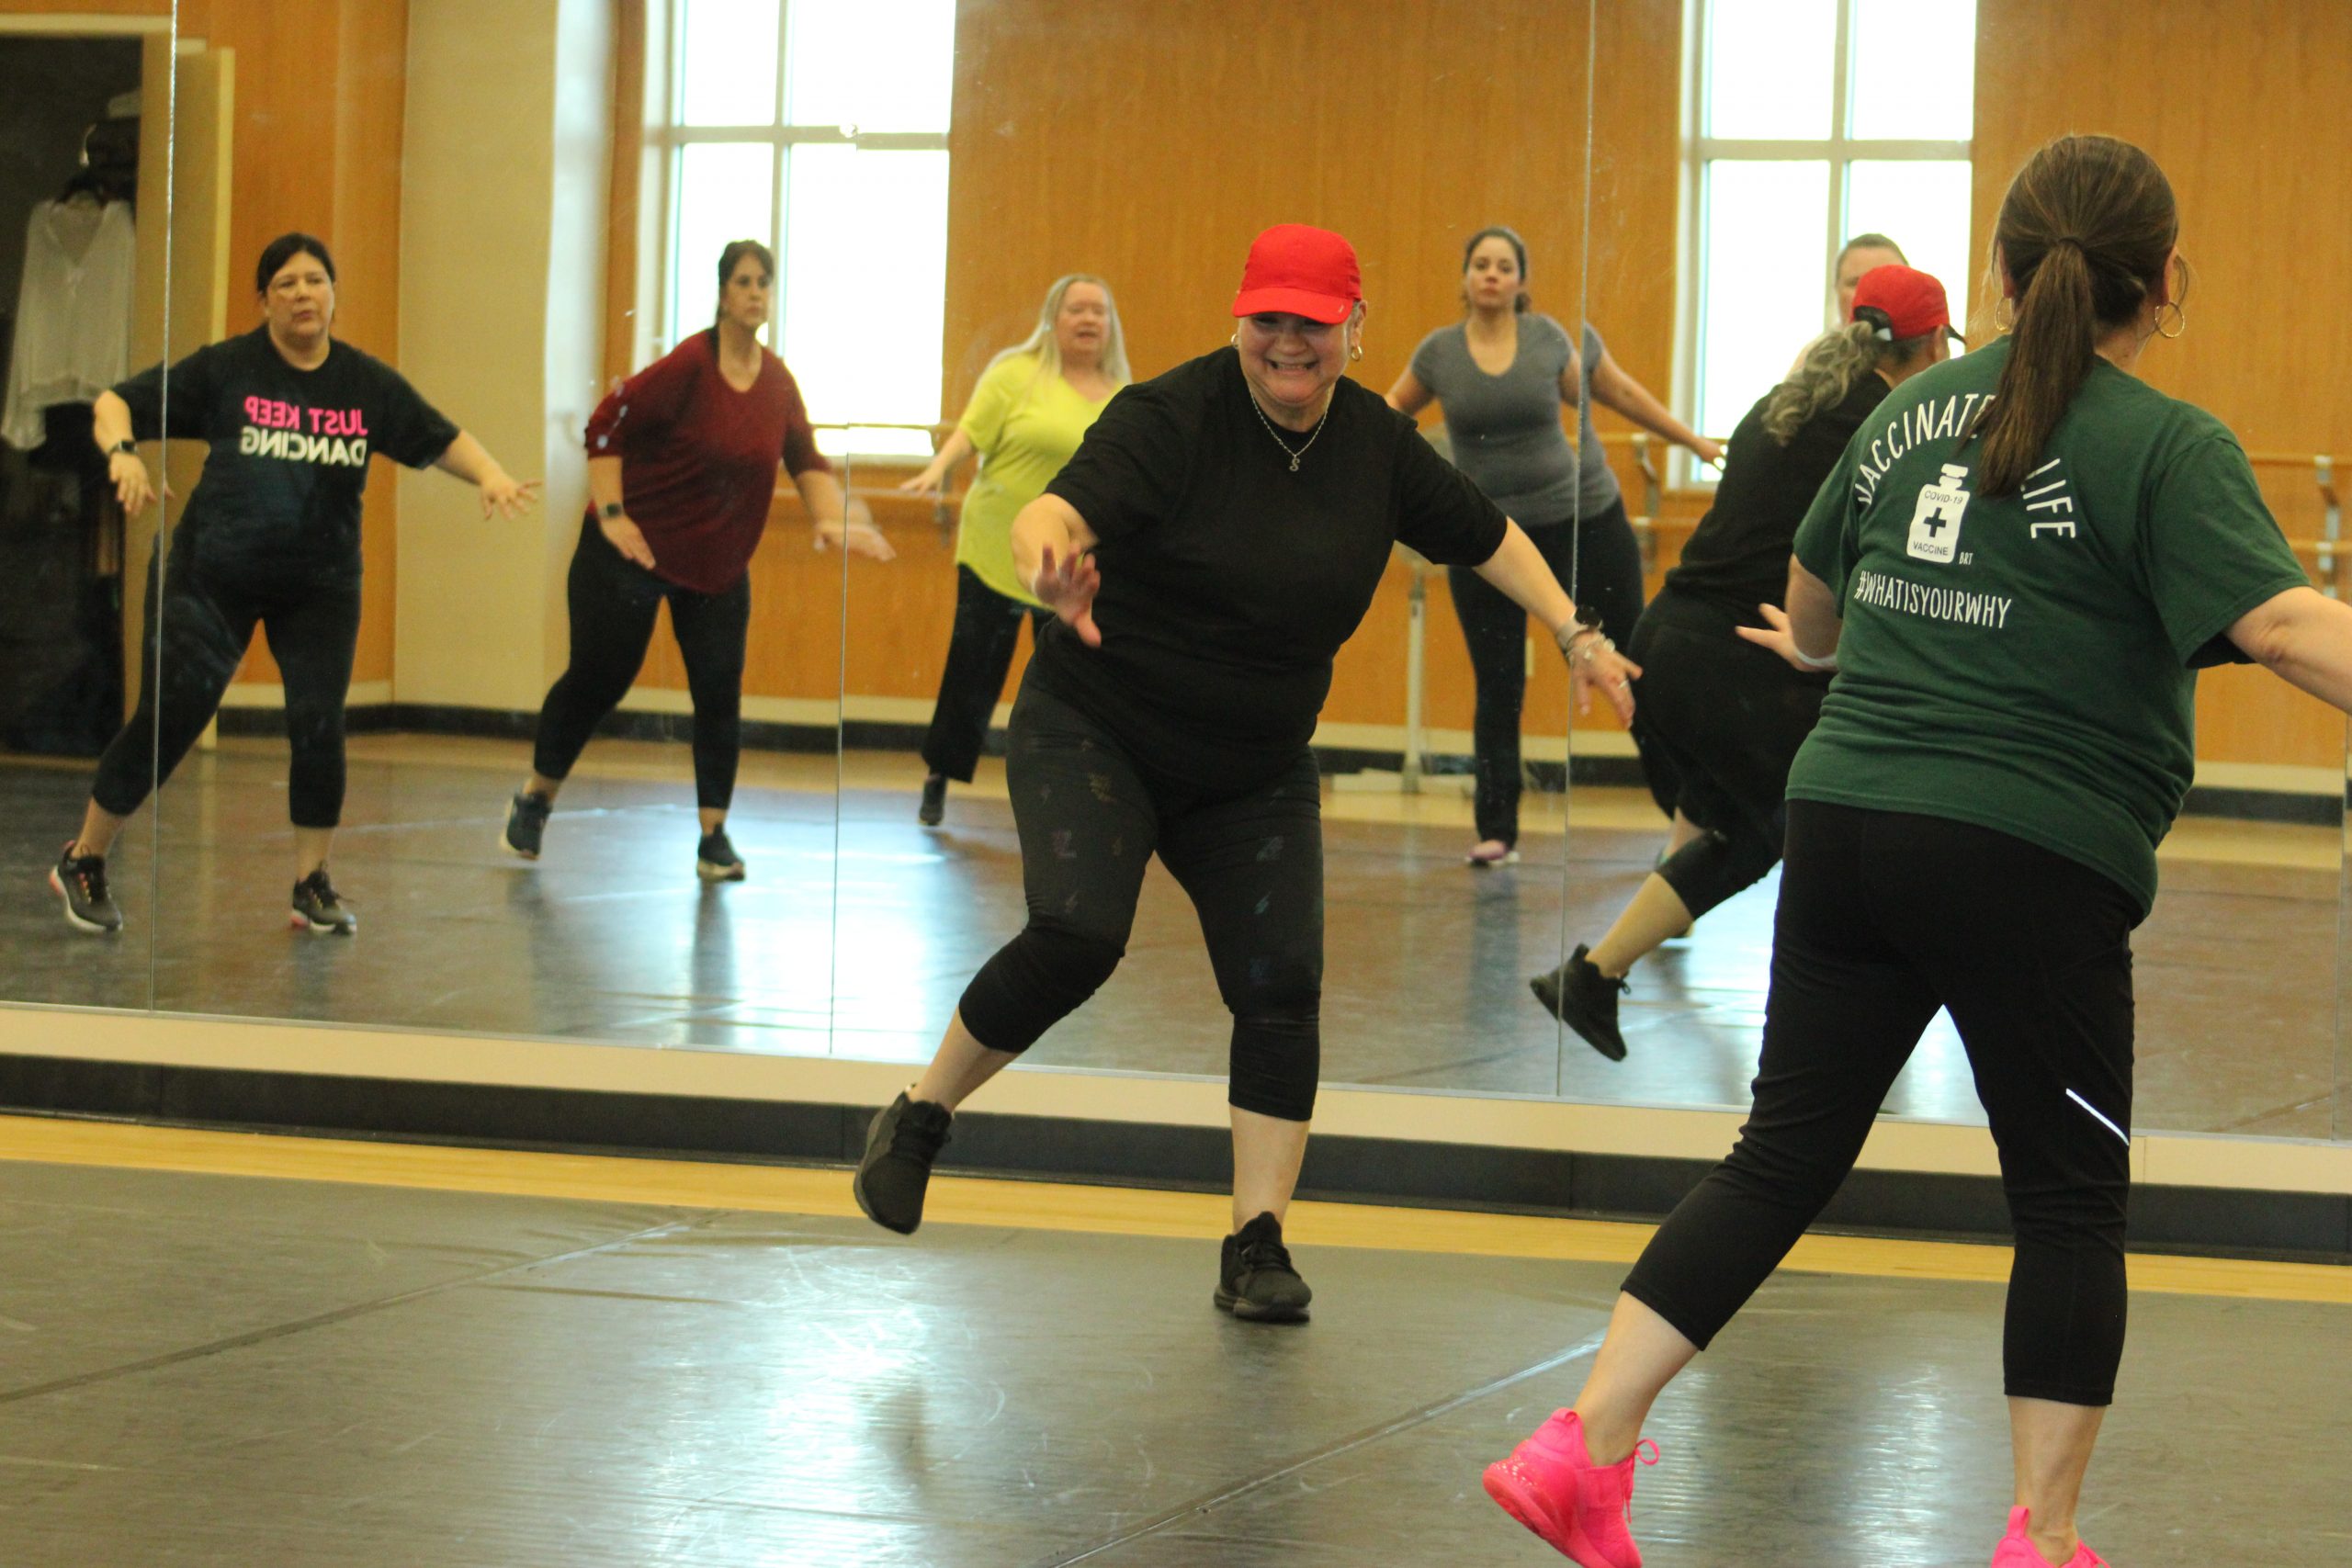 DMC Kinesiology Department now offering zumba classes